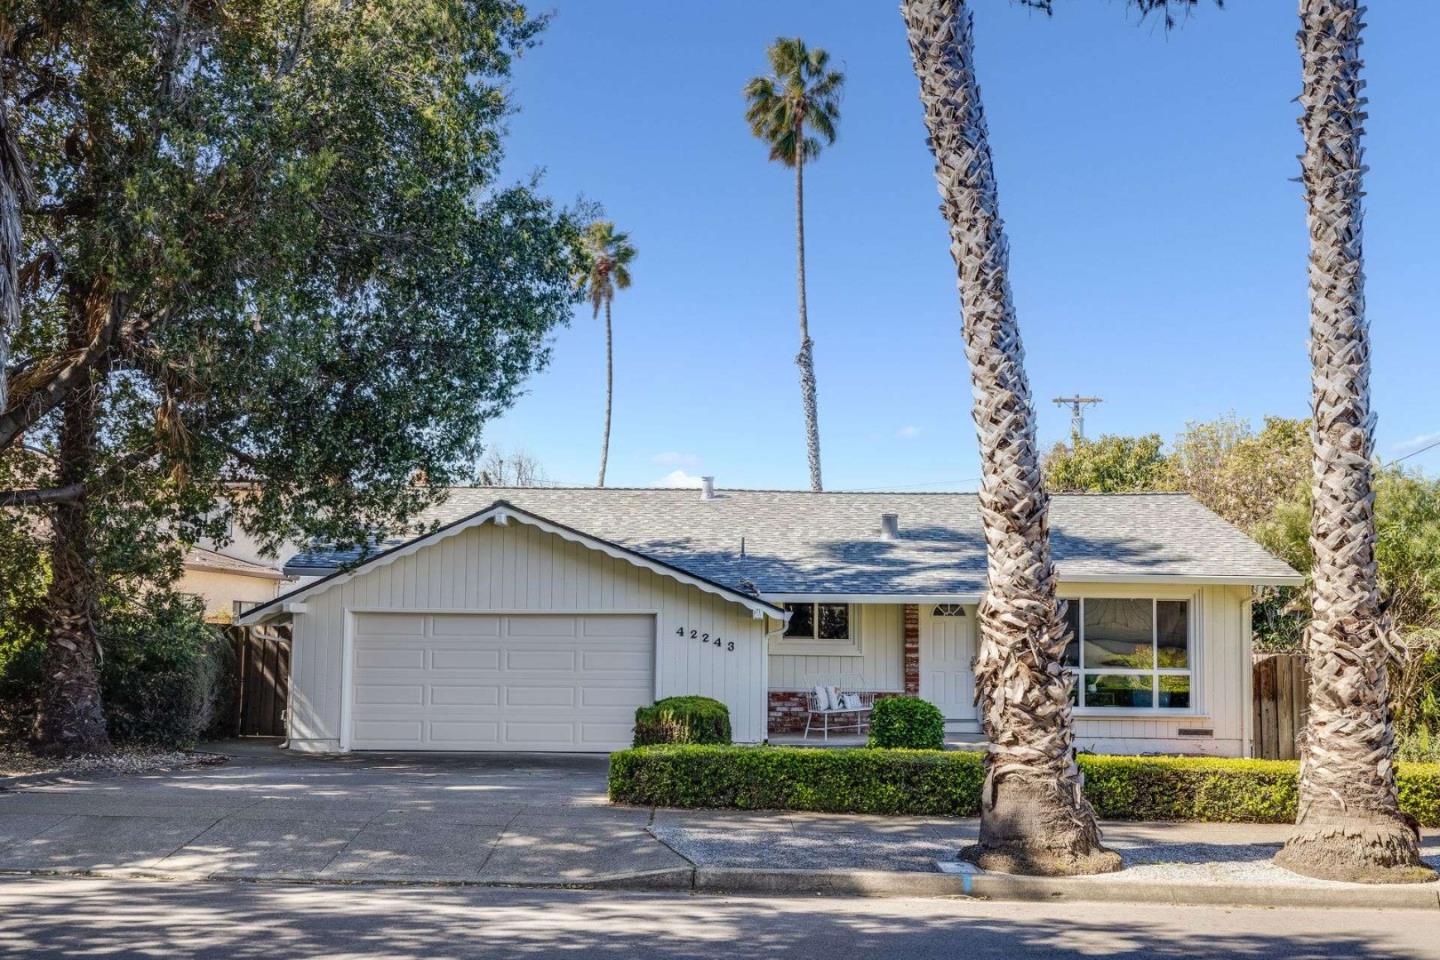 Photo of 42243 Palm Ave in Fremont, CA